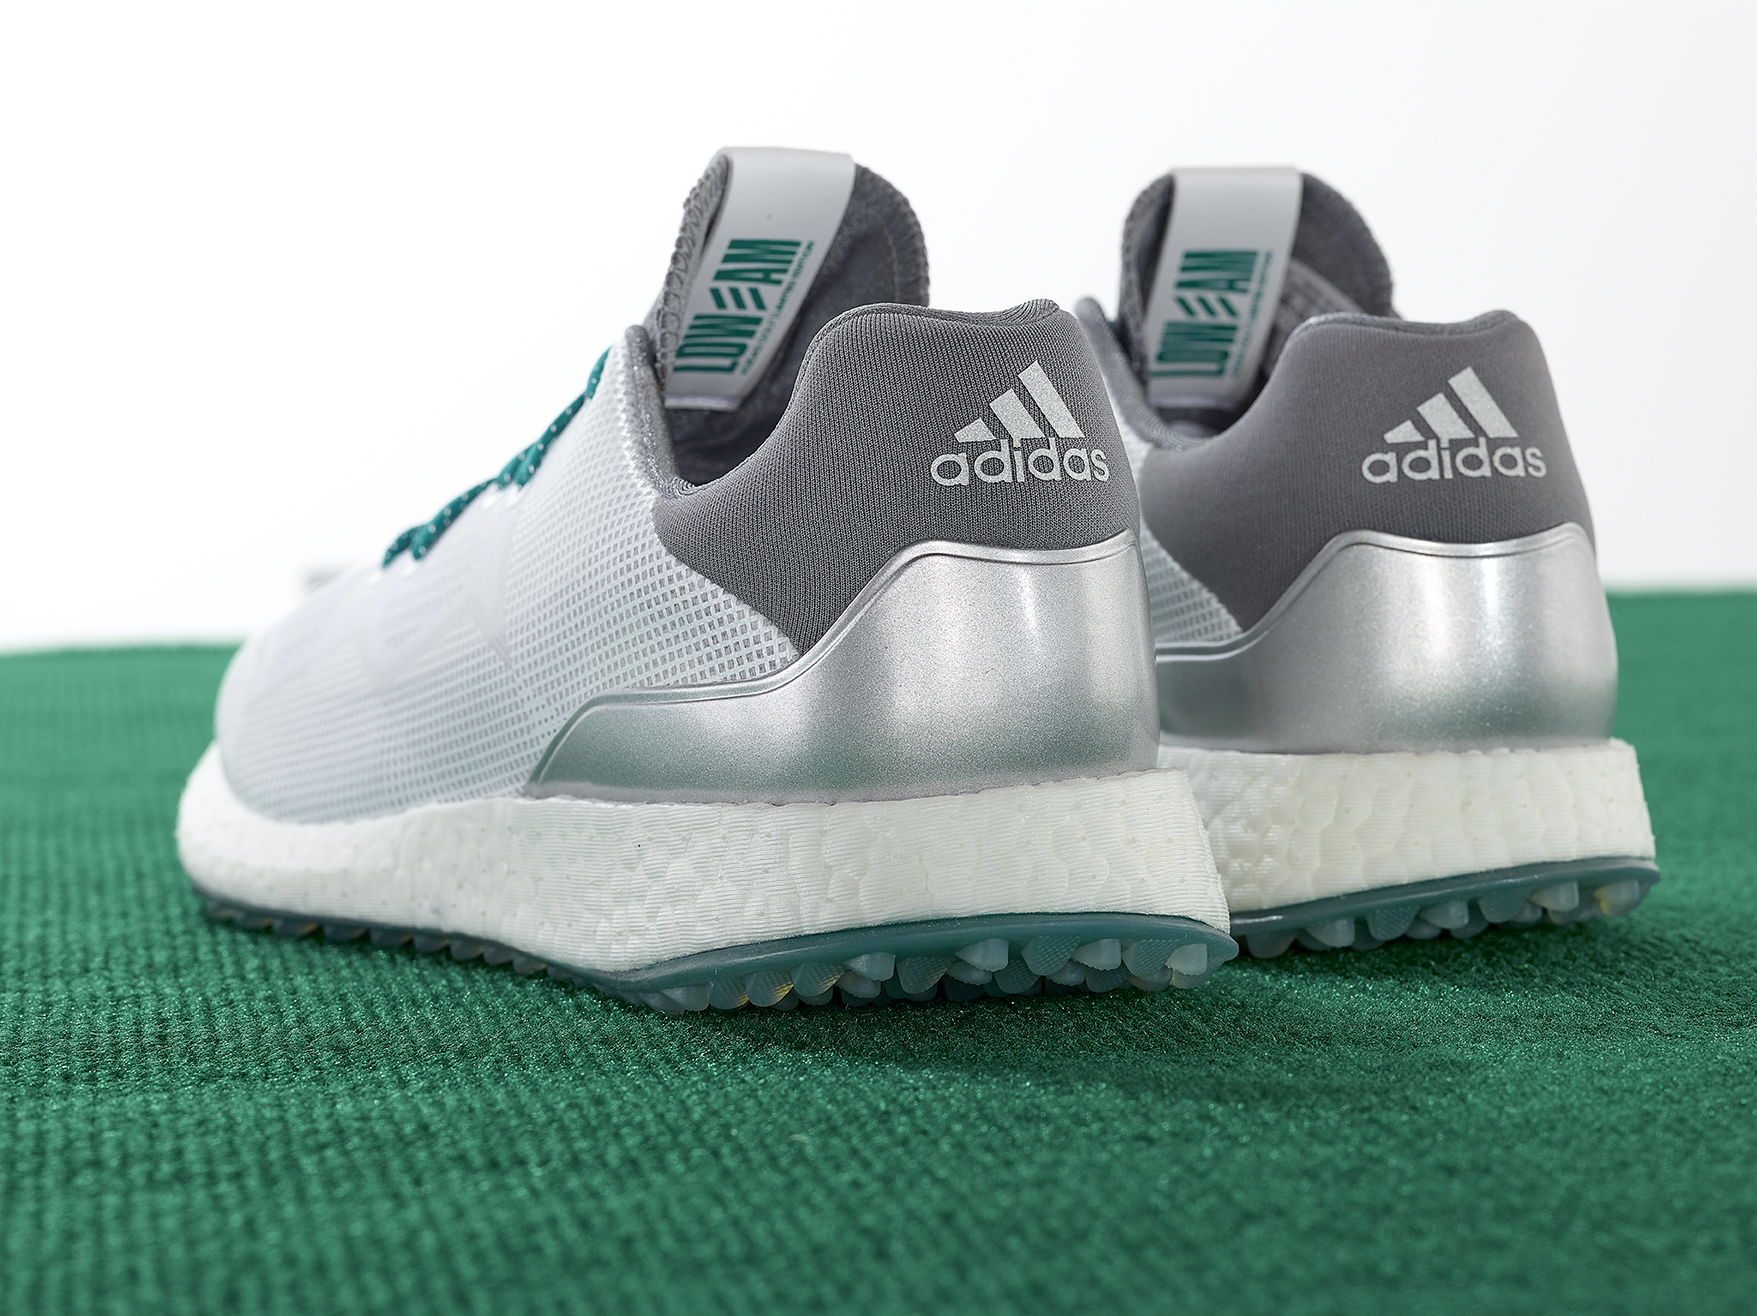 Adidas' new Crossknit golf shoes are inspired by one of most secretive Masters traditions | Golf Equipment: Clubs, Balls, Bags | Golf Digest